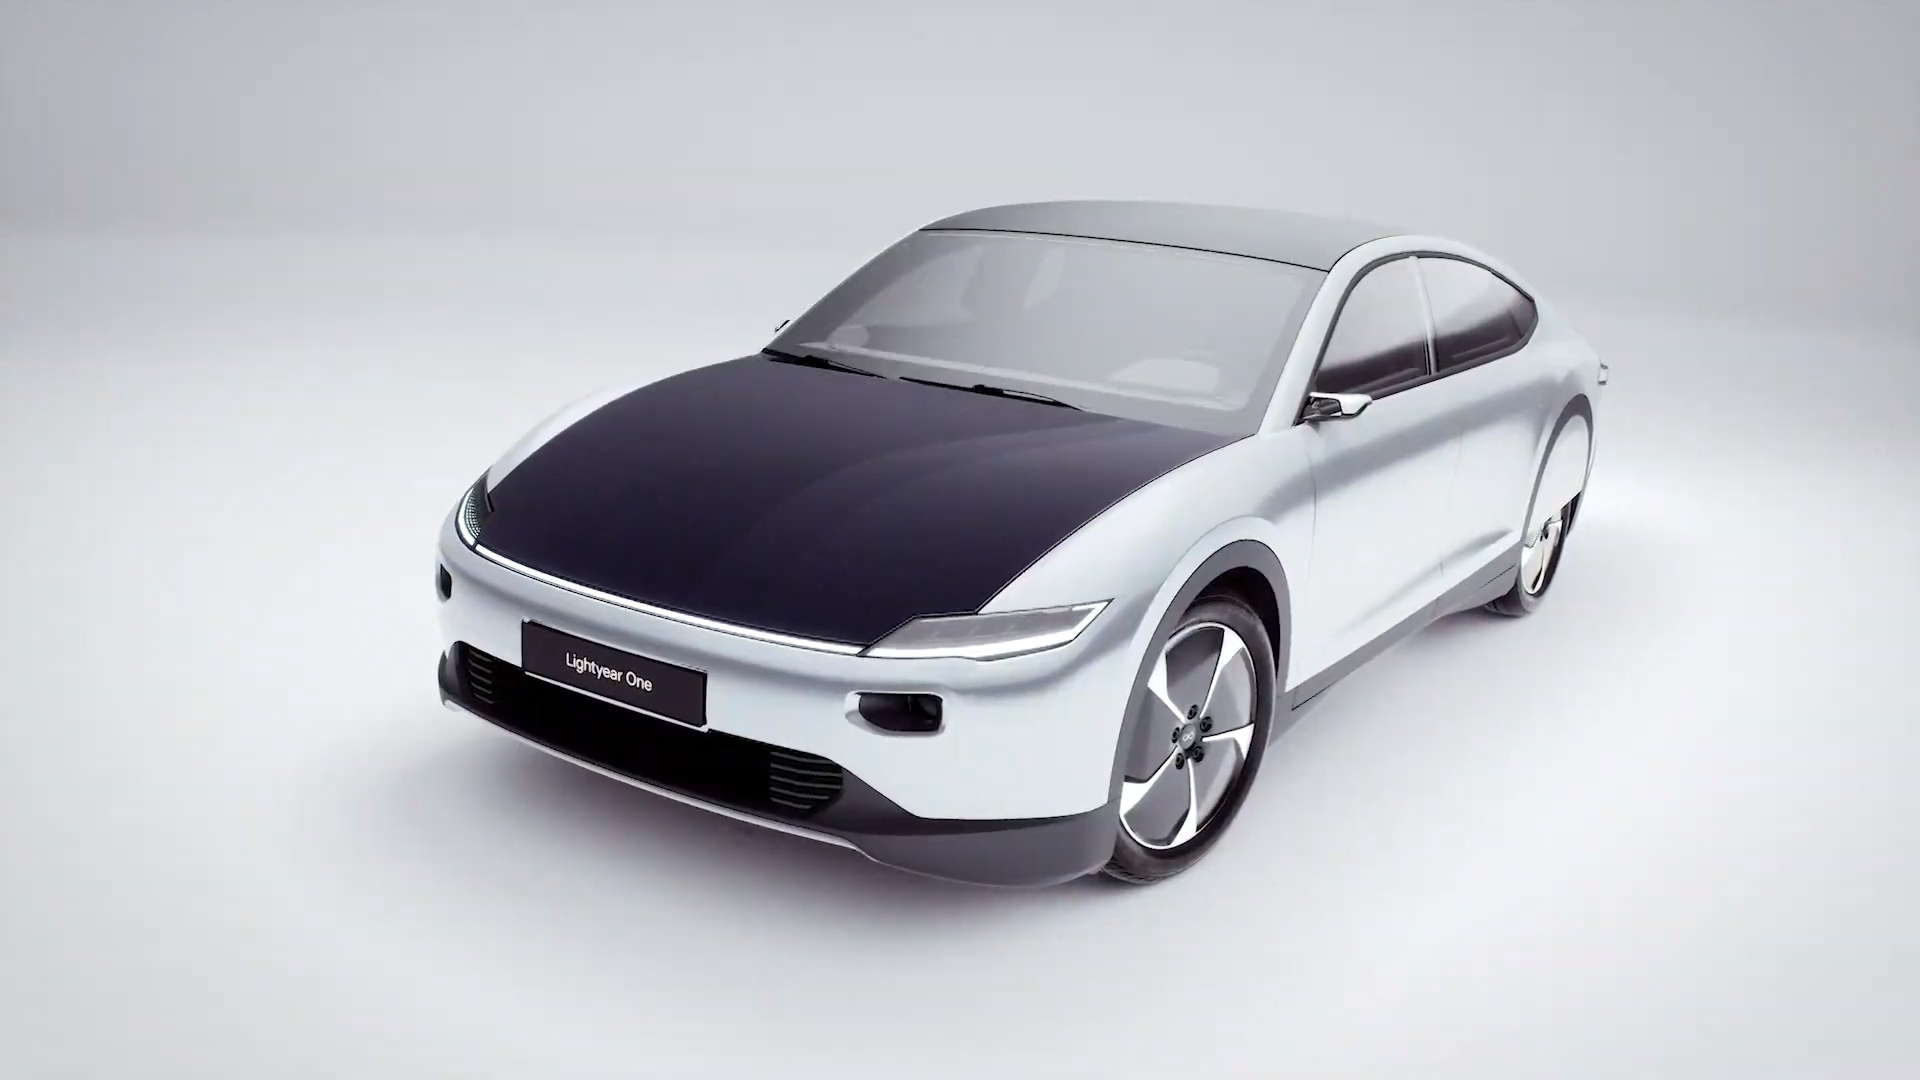 Lightyear unveils its 'solar' electric car with 450 miles of range